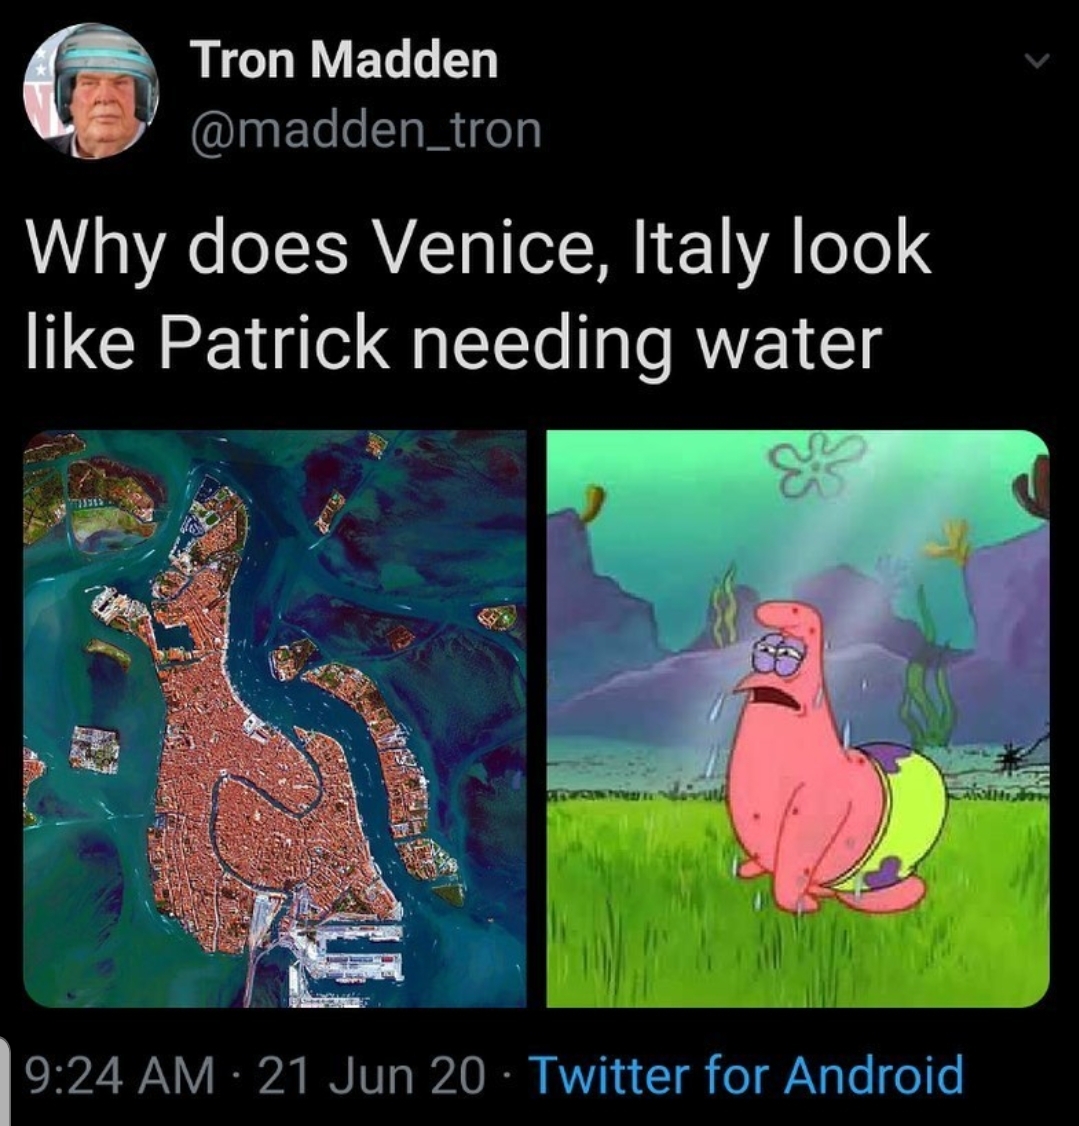 fauna - Tron Madden Why does Venice, Italy look Patrick needing water 21 Jun 20 Twitter for Android